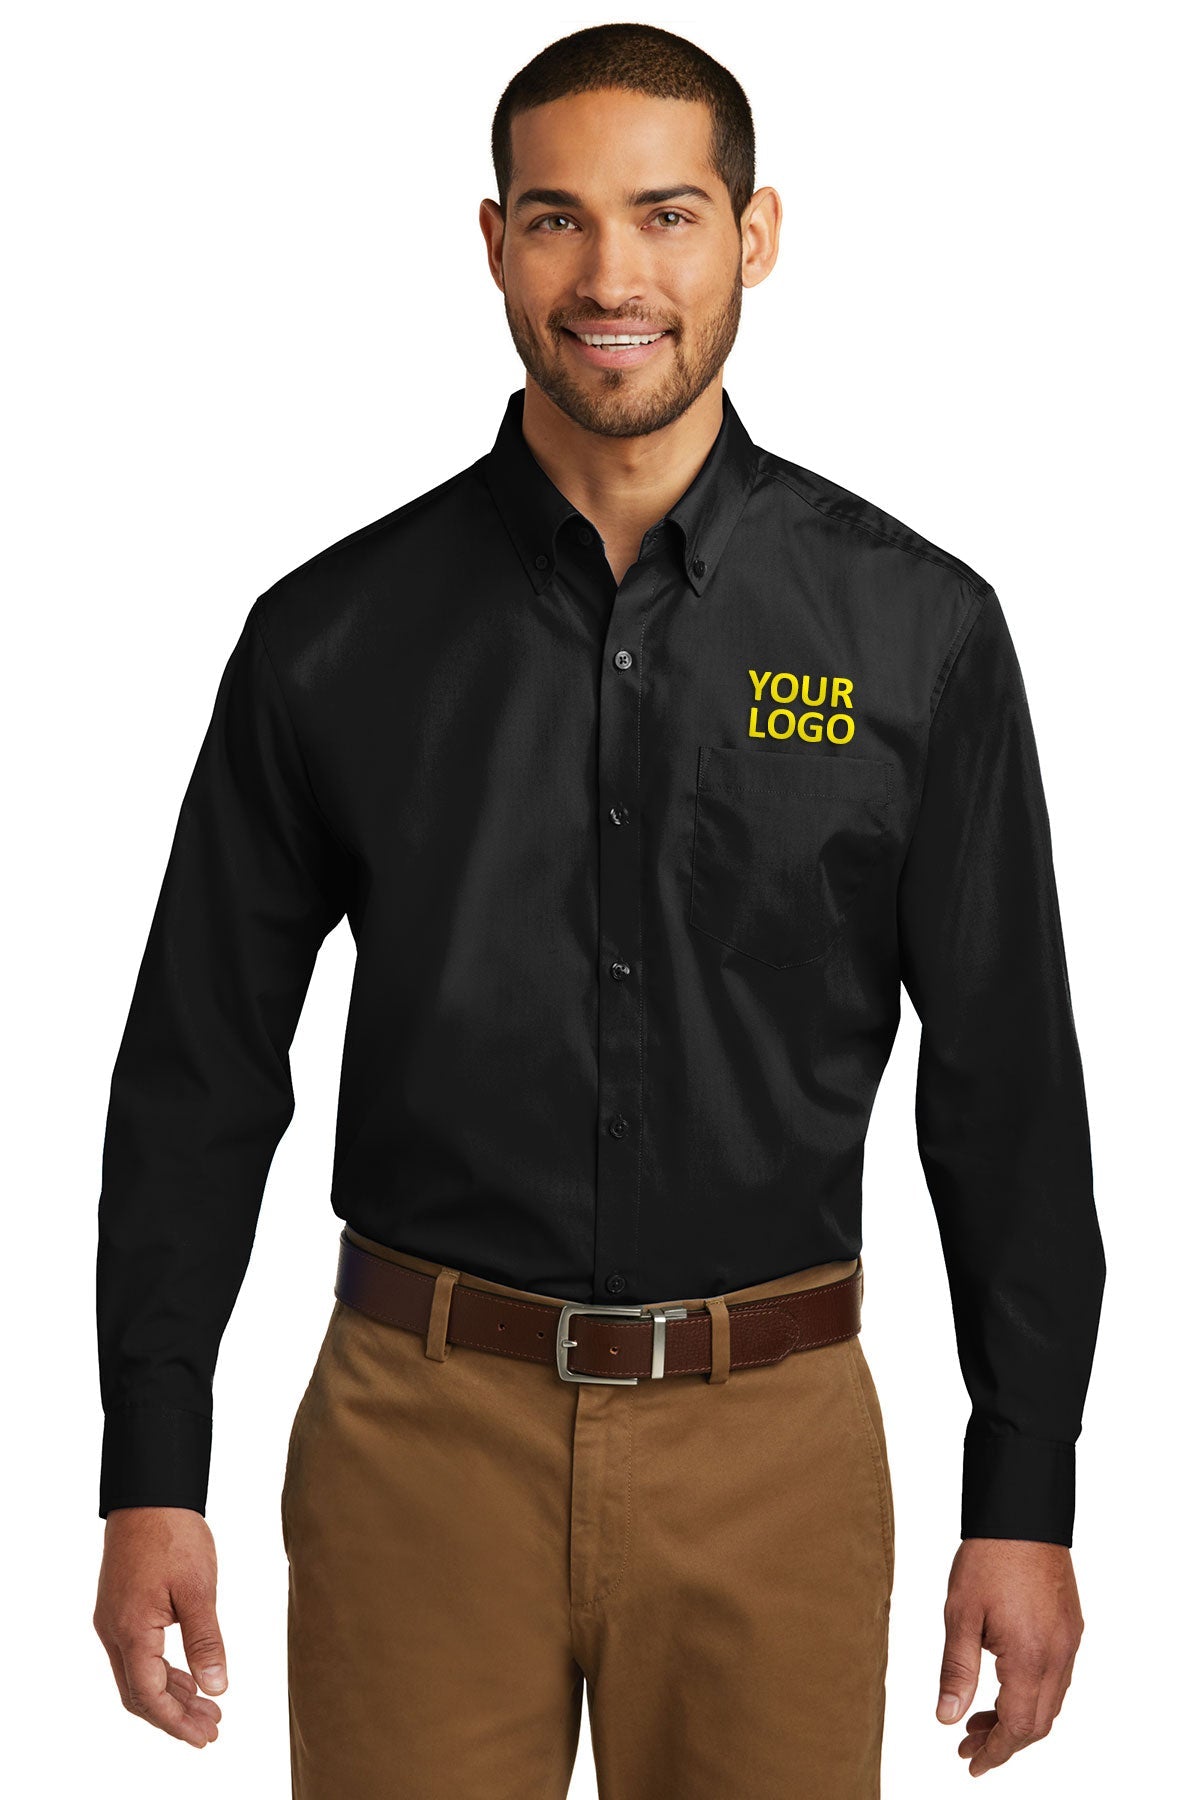 Port Authority Deep Black TW100 business shirts with company logo